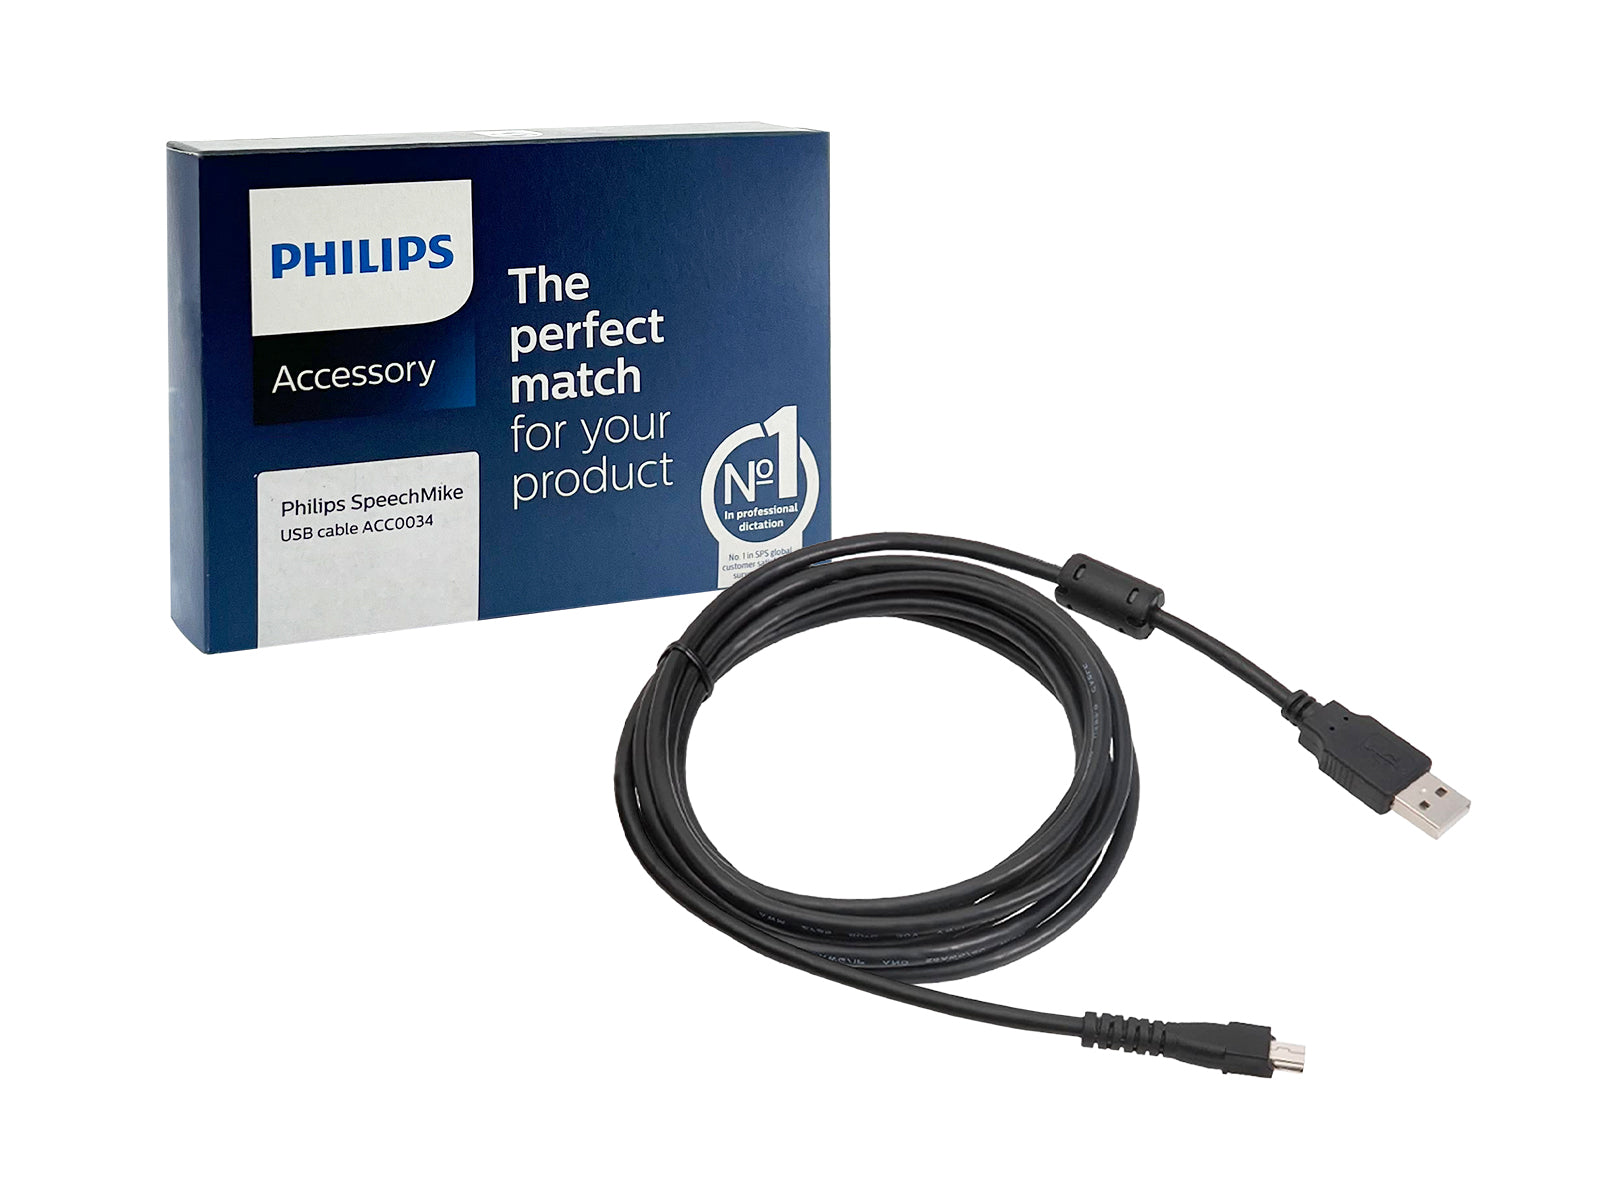 Philips Replacement USB Cable for Speechmike Microphones - 8ft | 2.4m (ACC0034) Monitors.com 